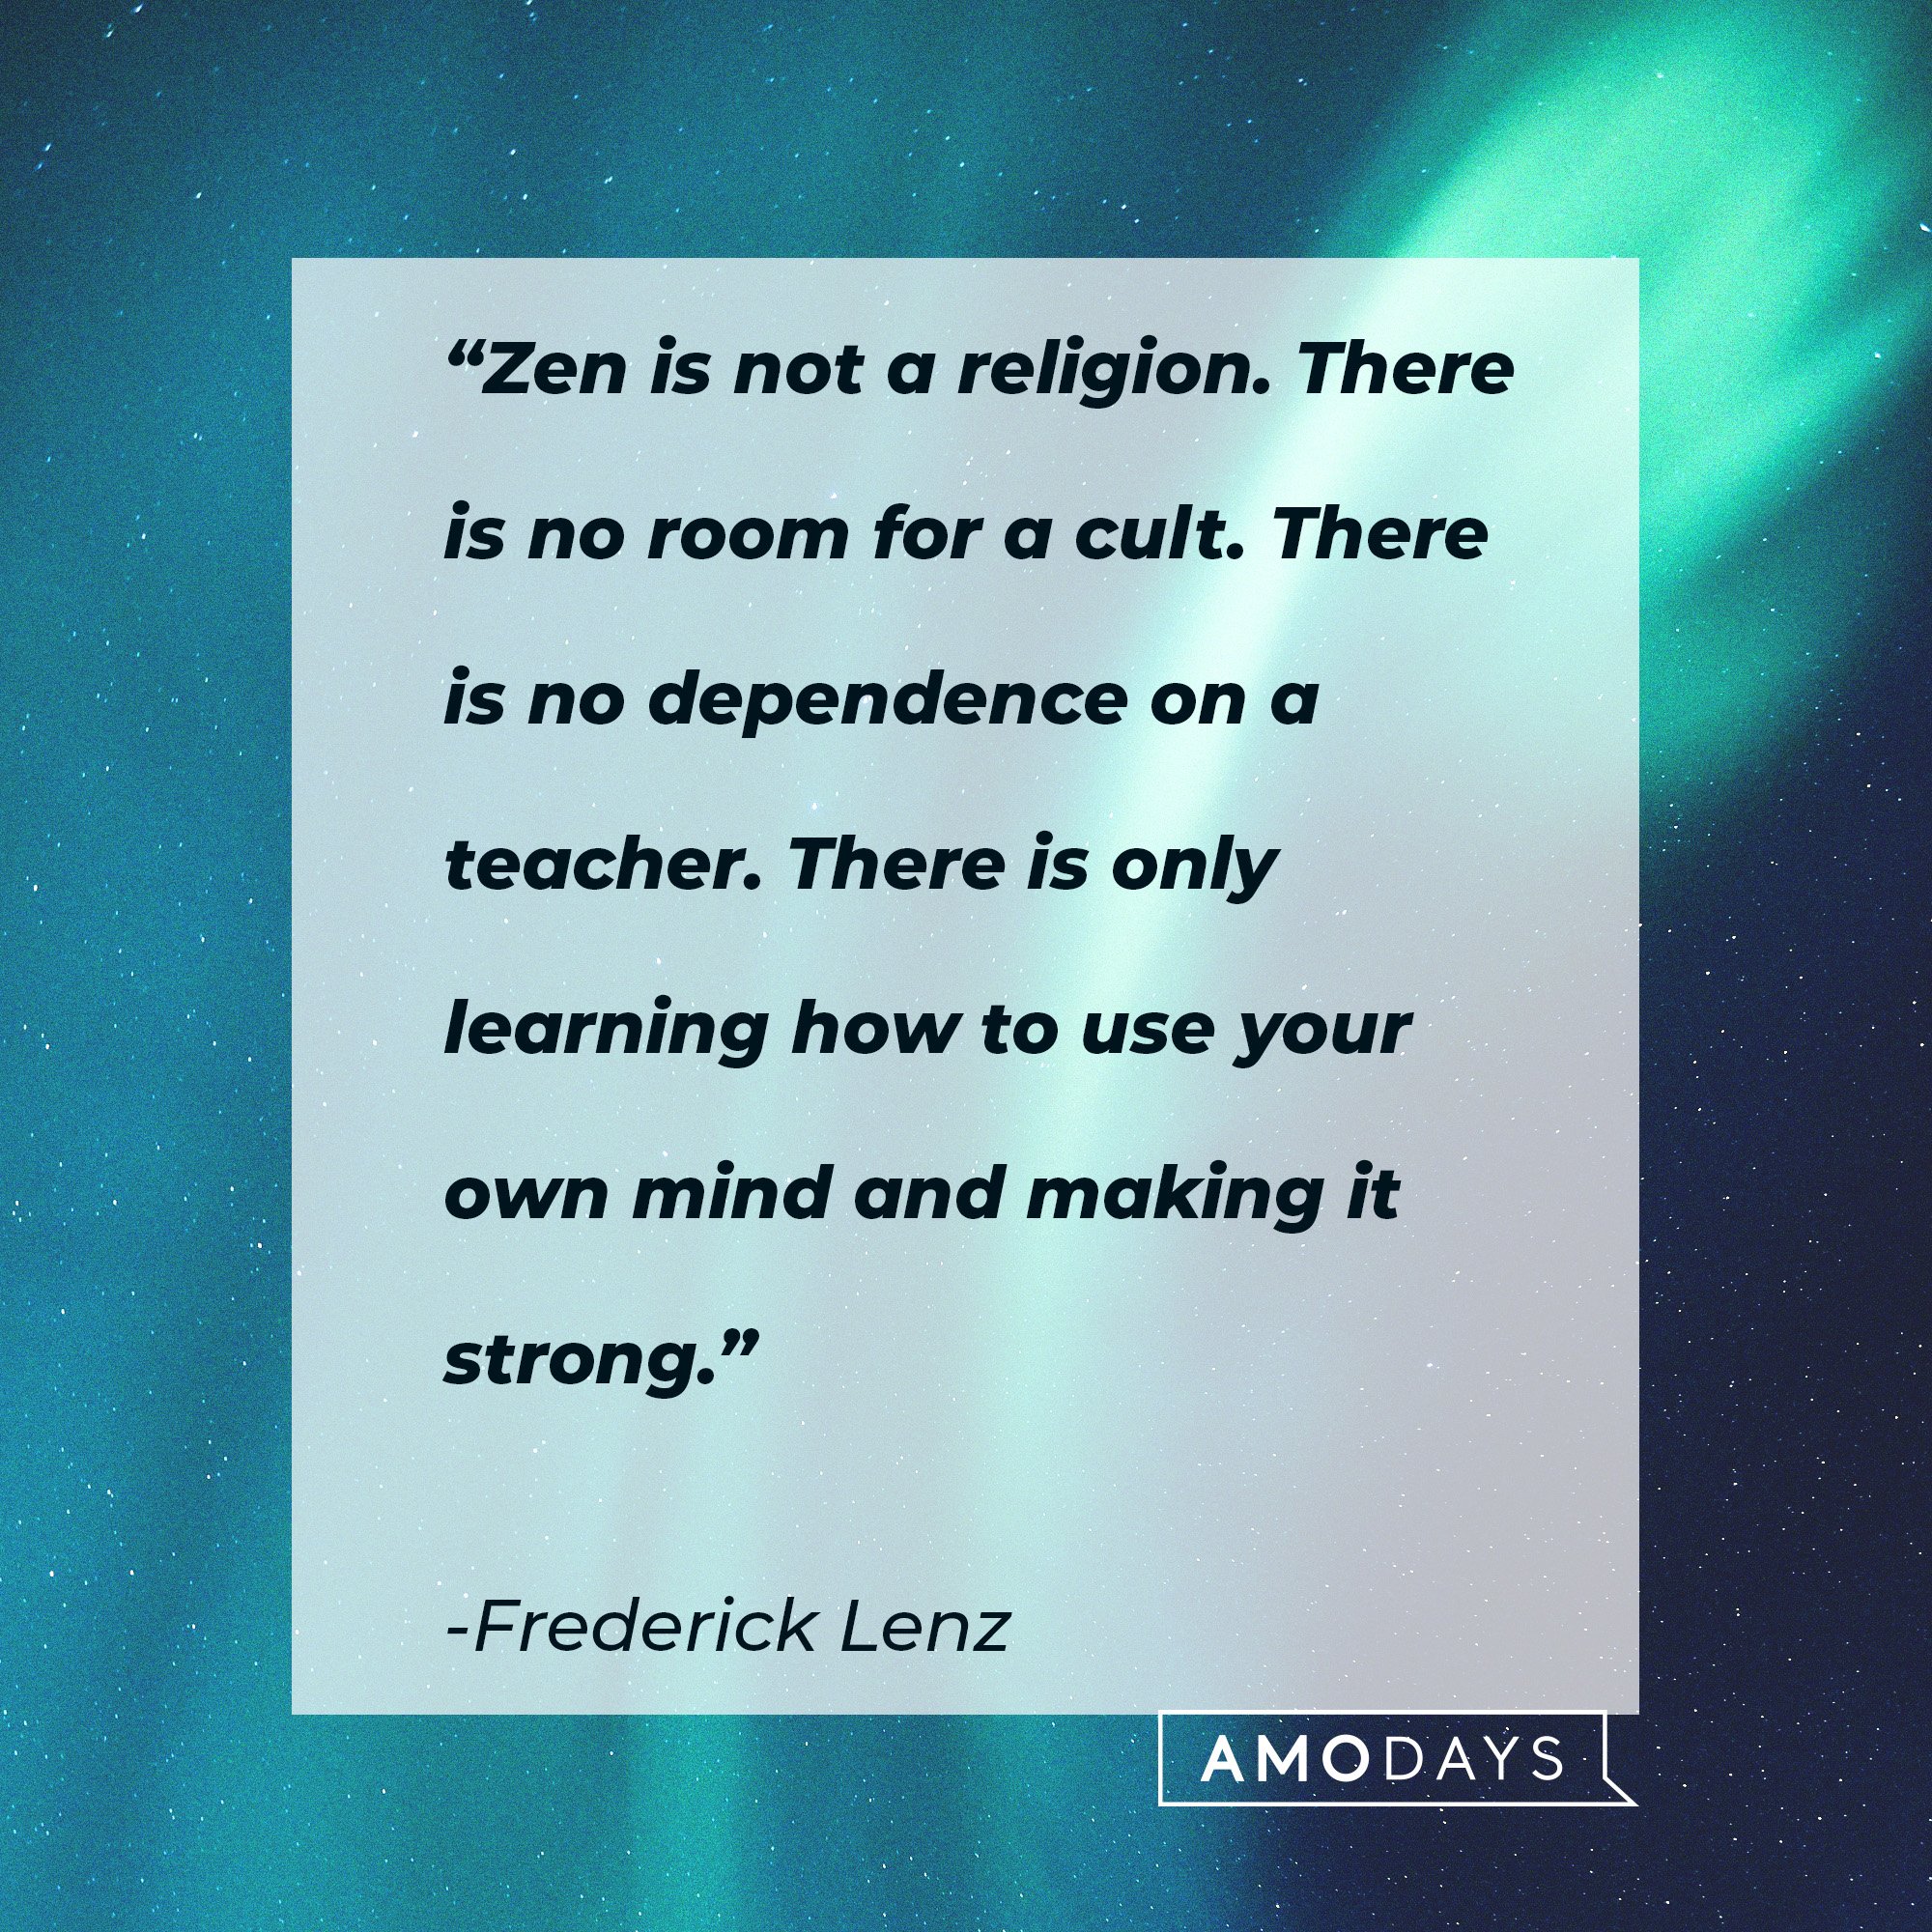 Frederick Lenz's quote: “Zen is not a religion. There is no room for a cult. There is no dependence on a teacher. There is only learning how to use your own mind and making it strong.” | Image: AmoDays